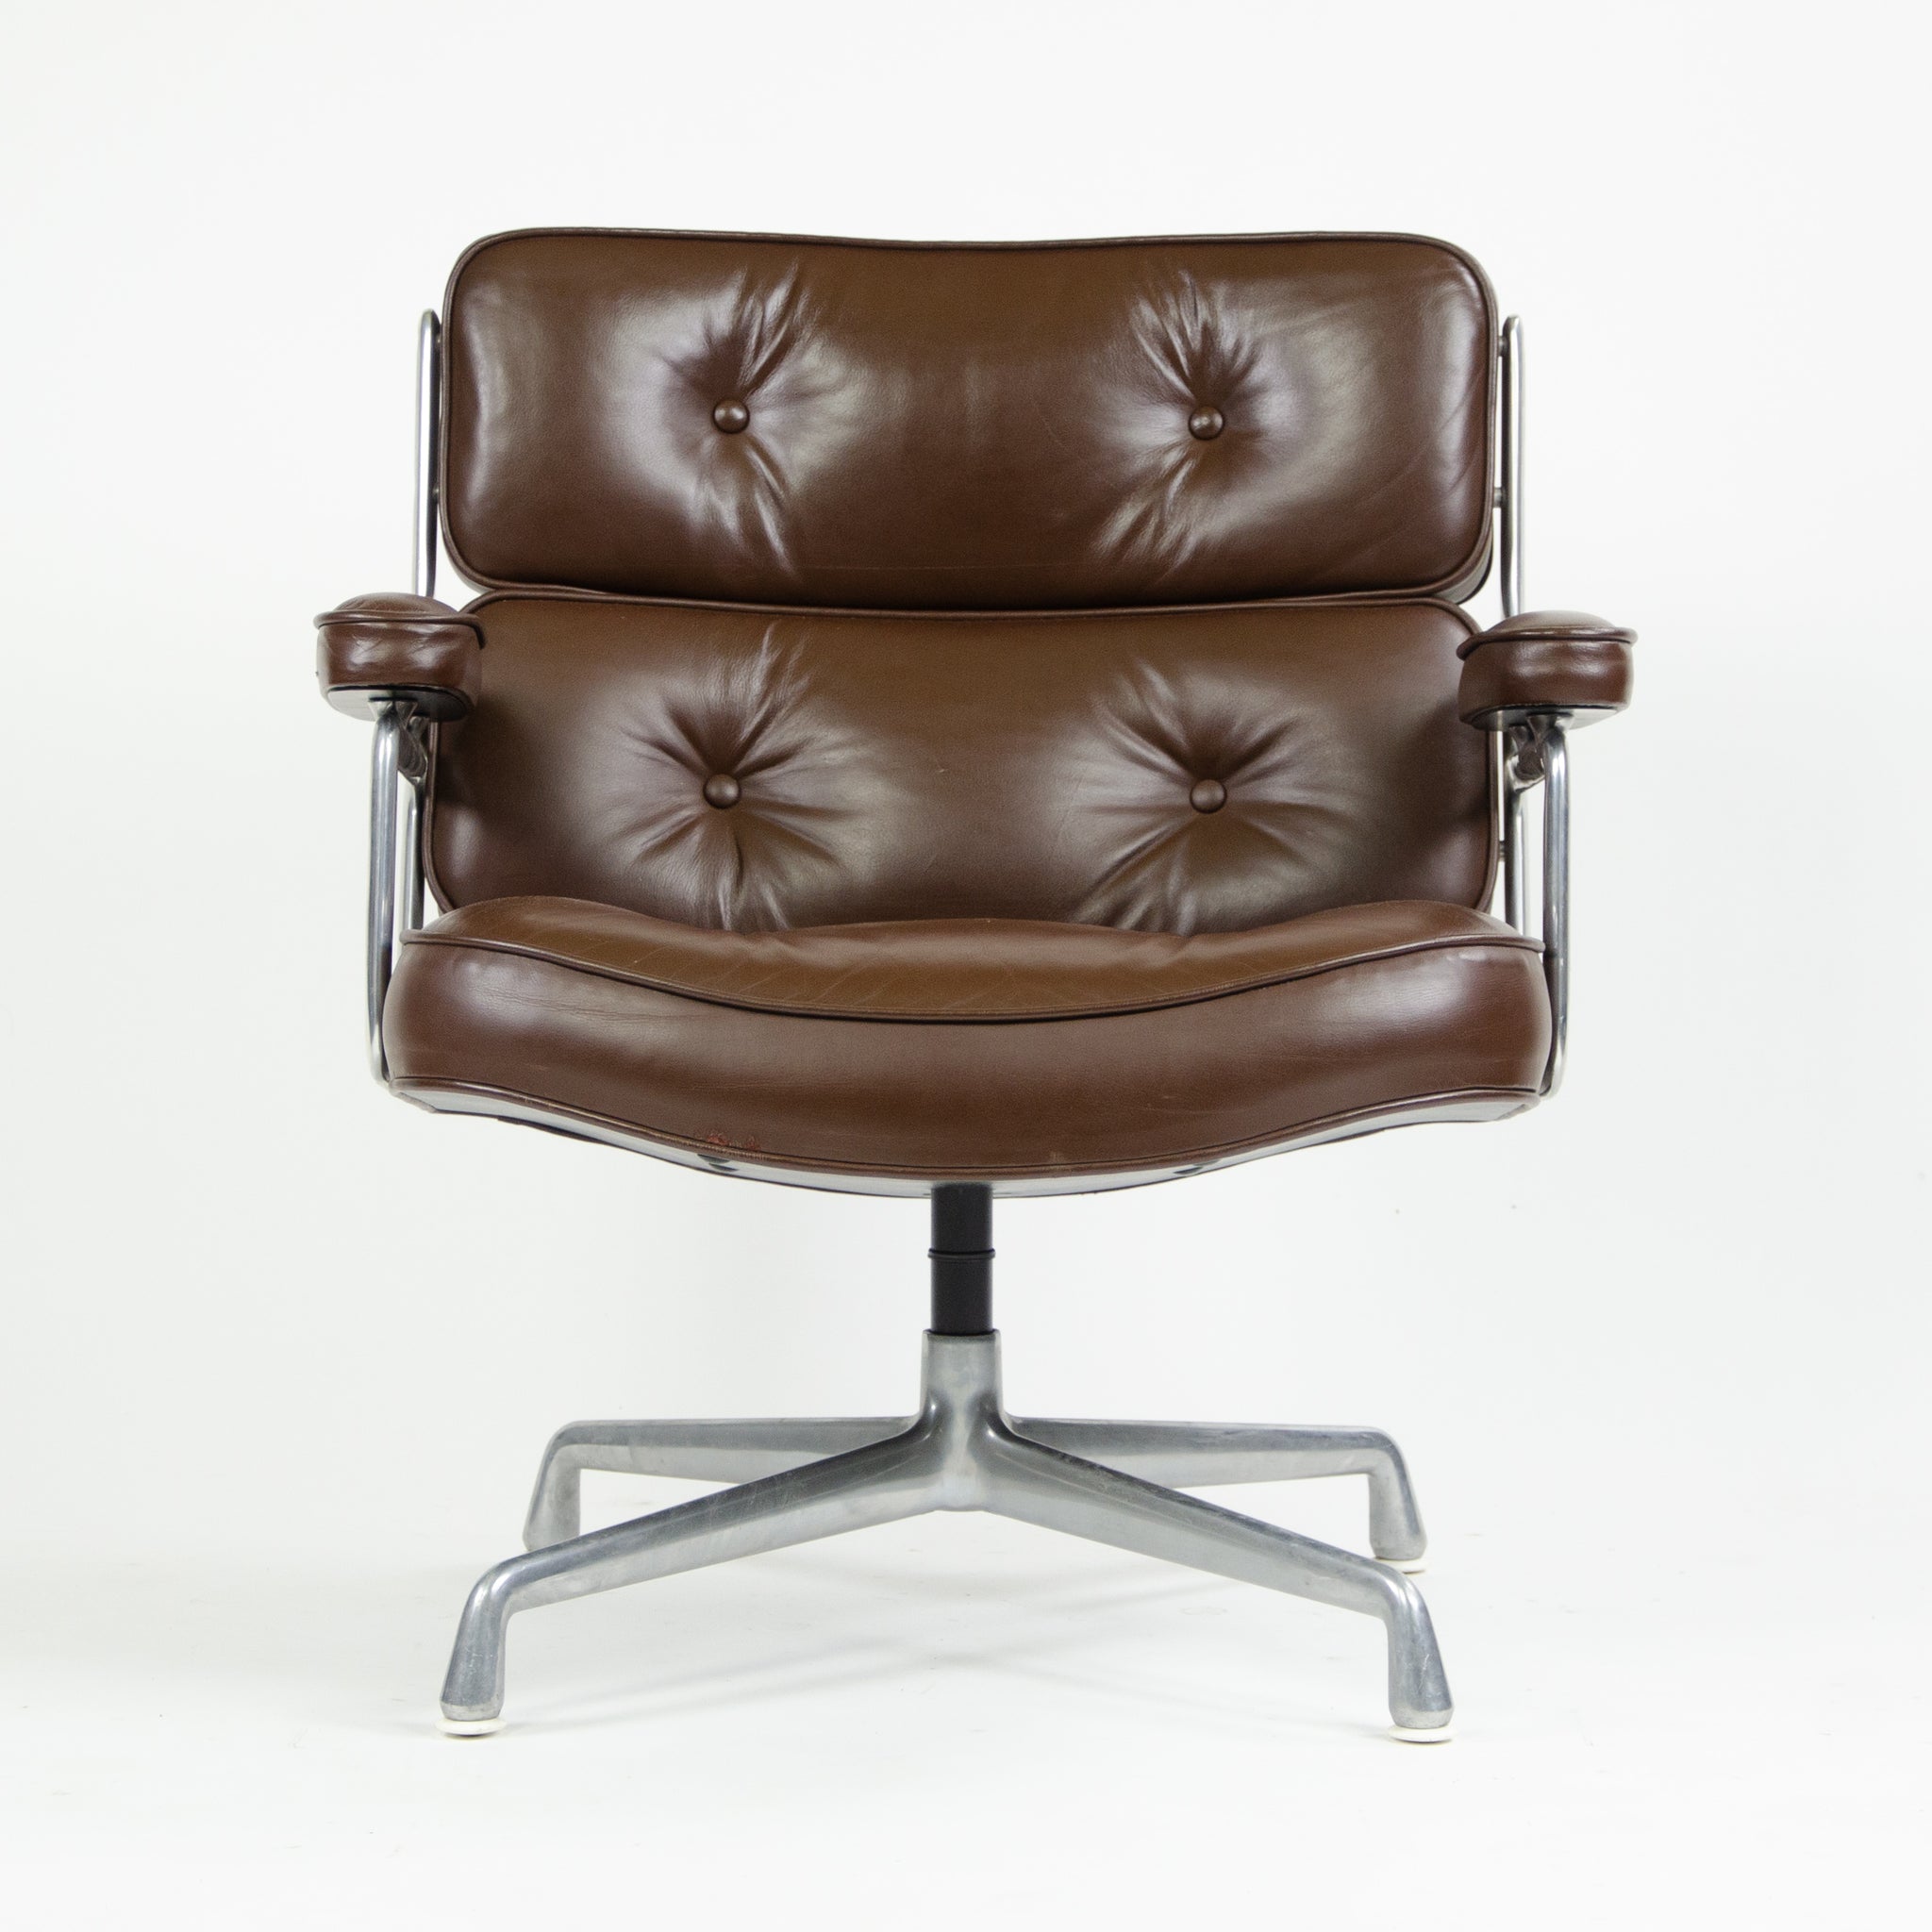 SOLD Brown Eames Herman Miller Vintage Time Life Aluminum Group Chair 1970's 2x Available